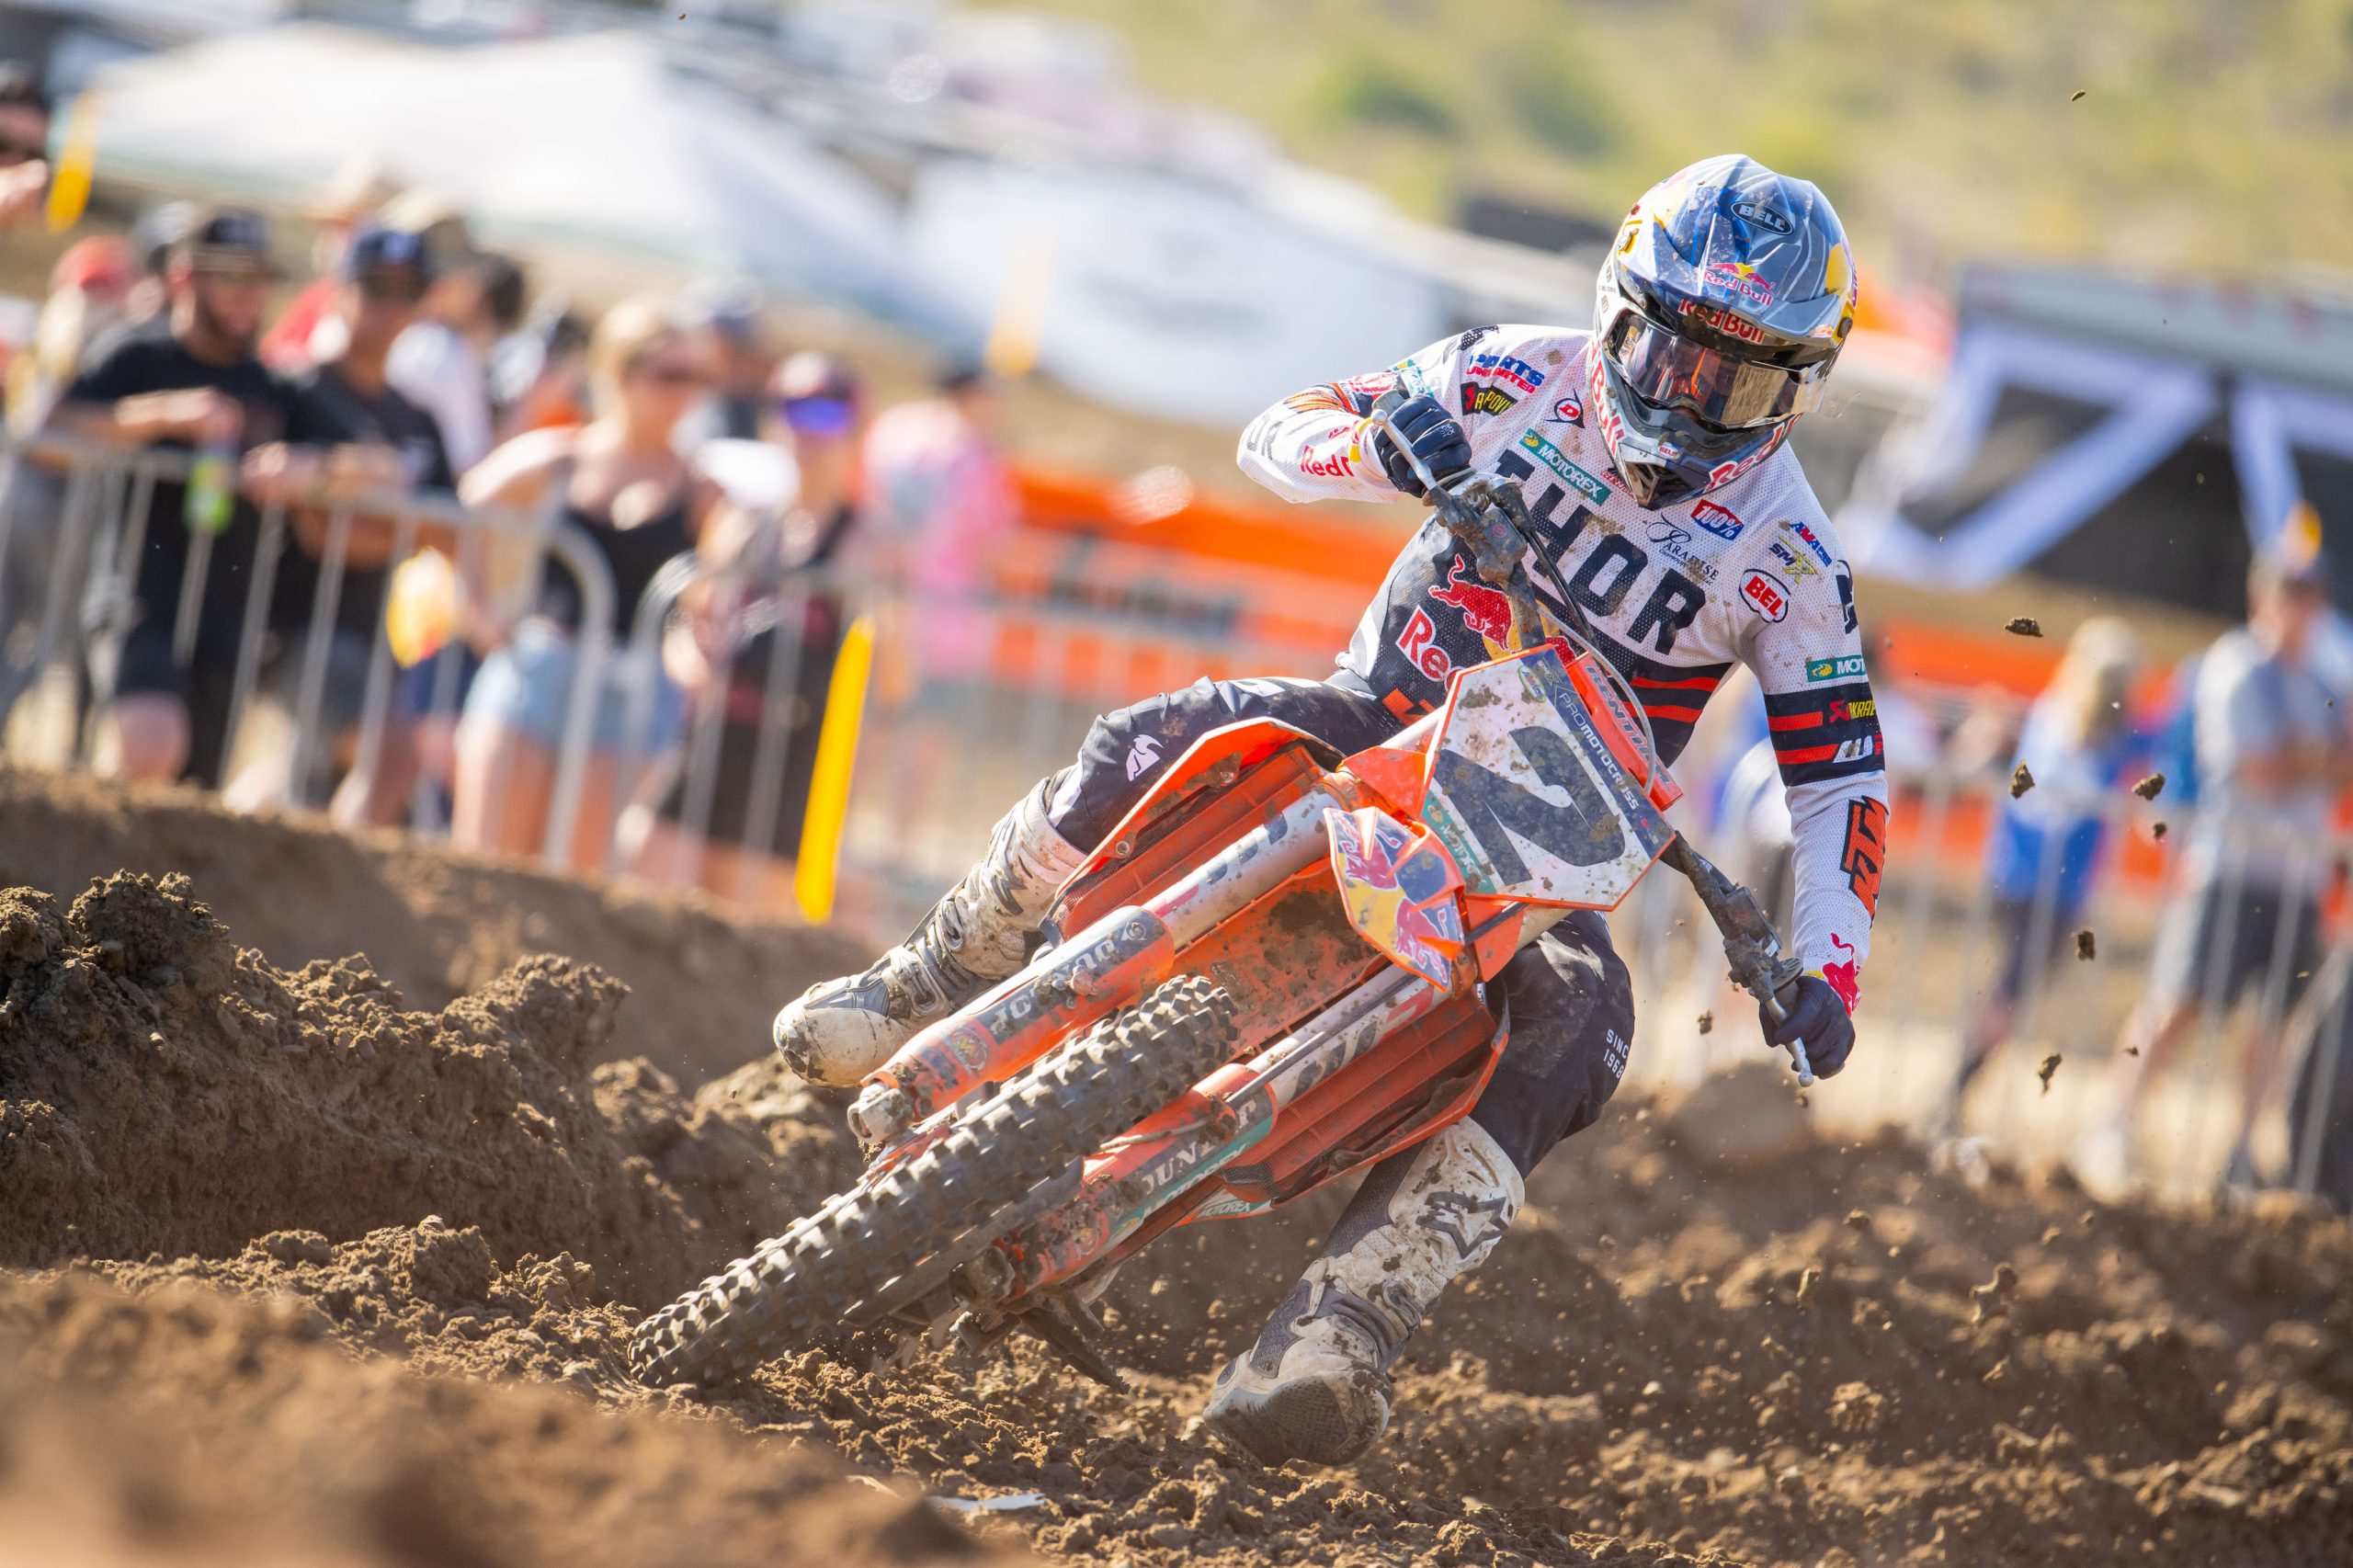 CONSISTENT START TO 2023 PRO MOTOCROSS SEASON FOR RED BULL KTM FACTORY RACING